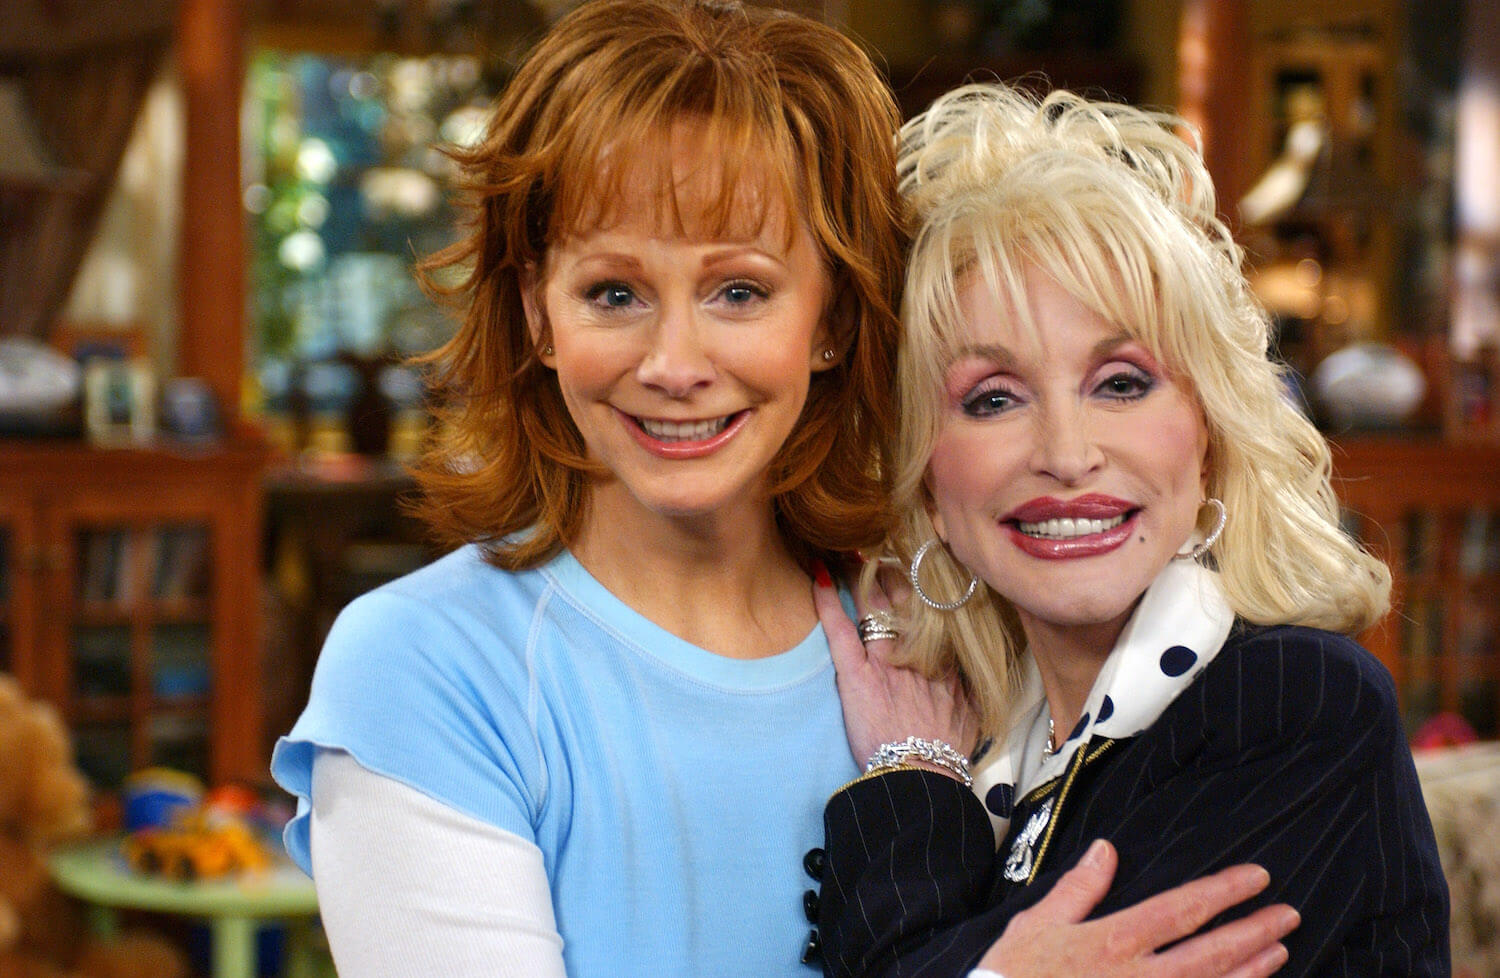 'The Voice' Season 24 star Reba McEntire smiling with Dolly Parton in 2005